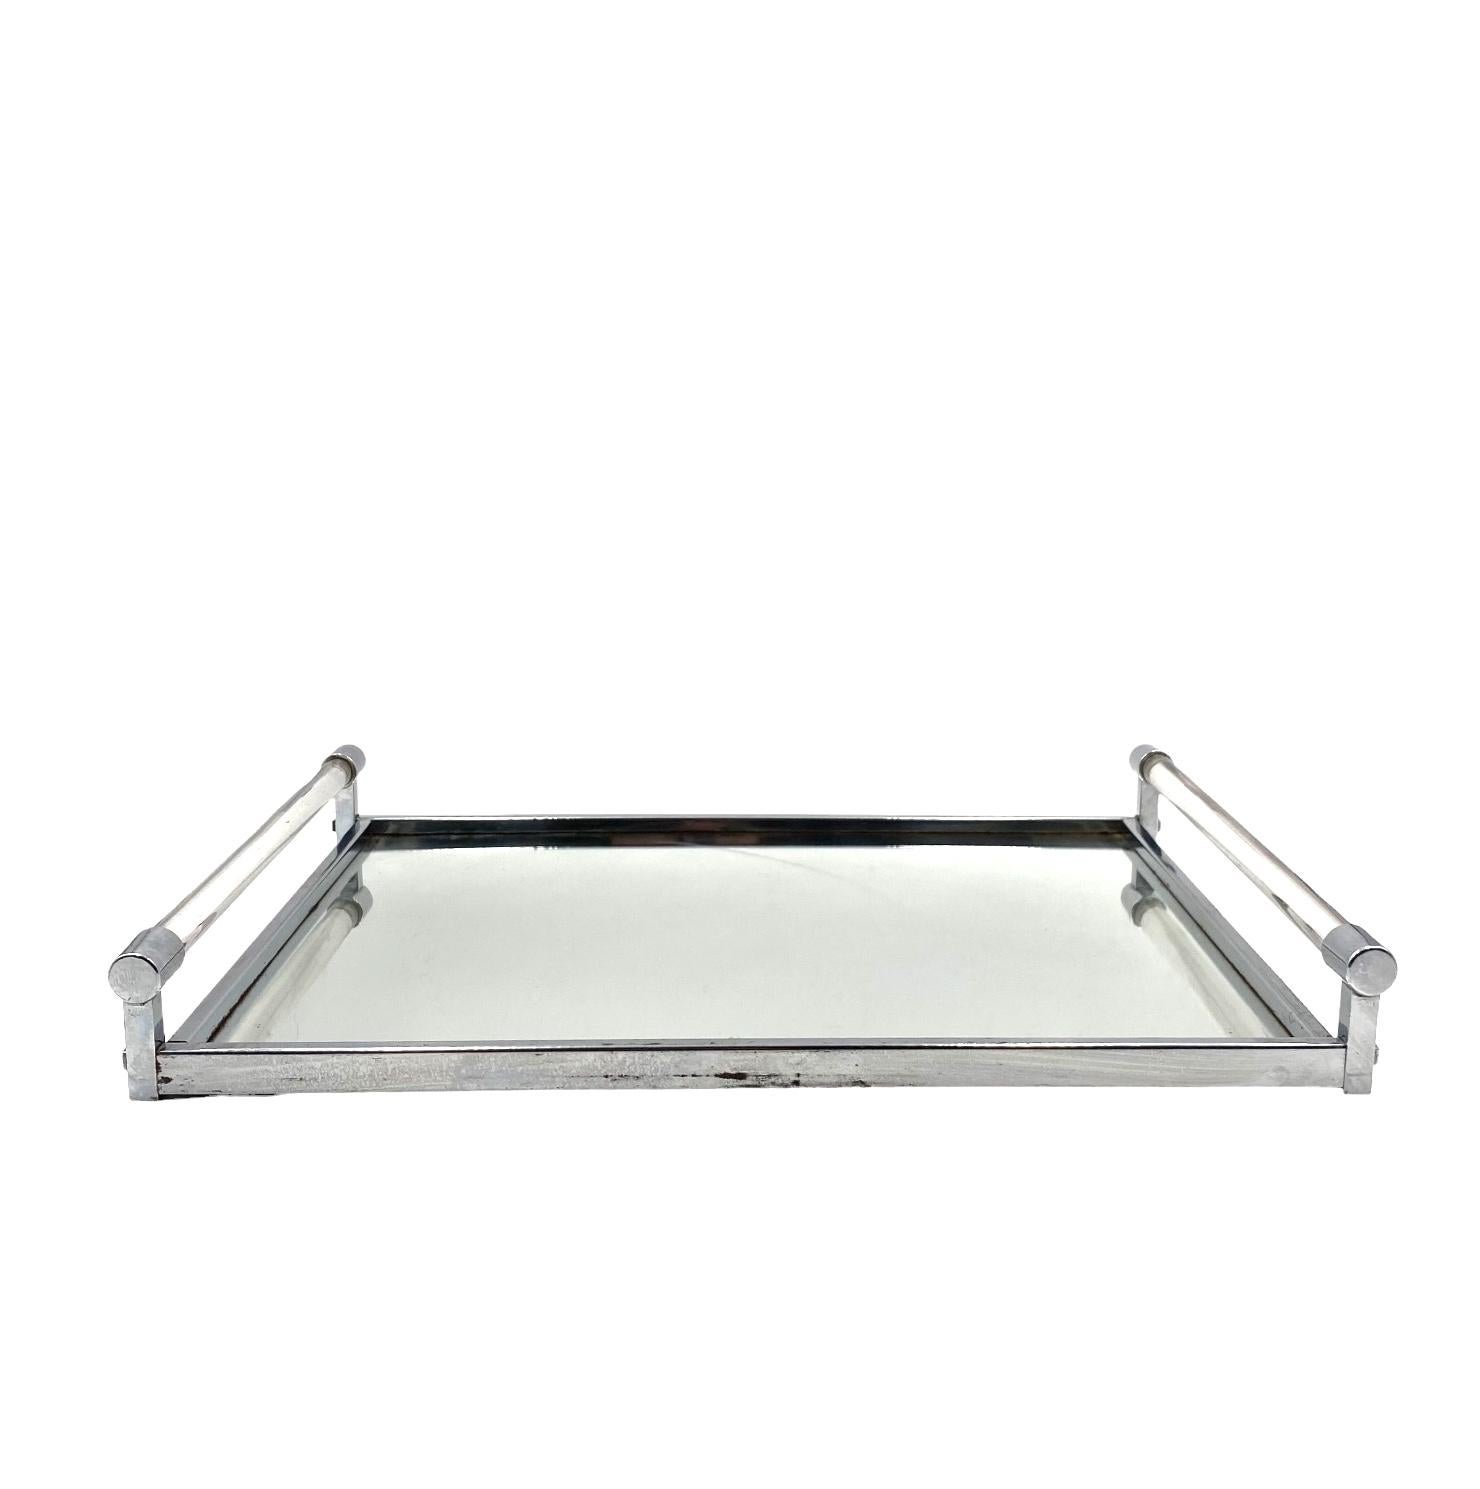 Jacques Adnet, Modernist lucite mirrored tray, Maison Adnet, France 1940s For Sale 5